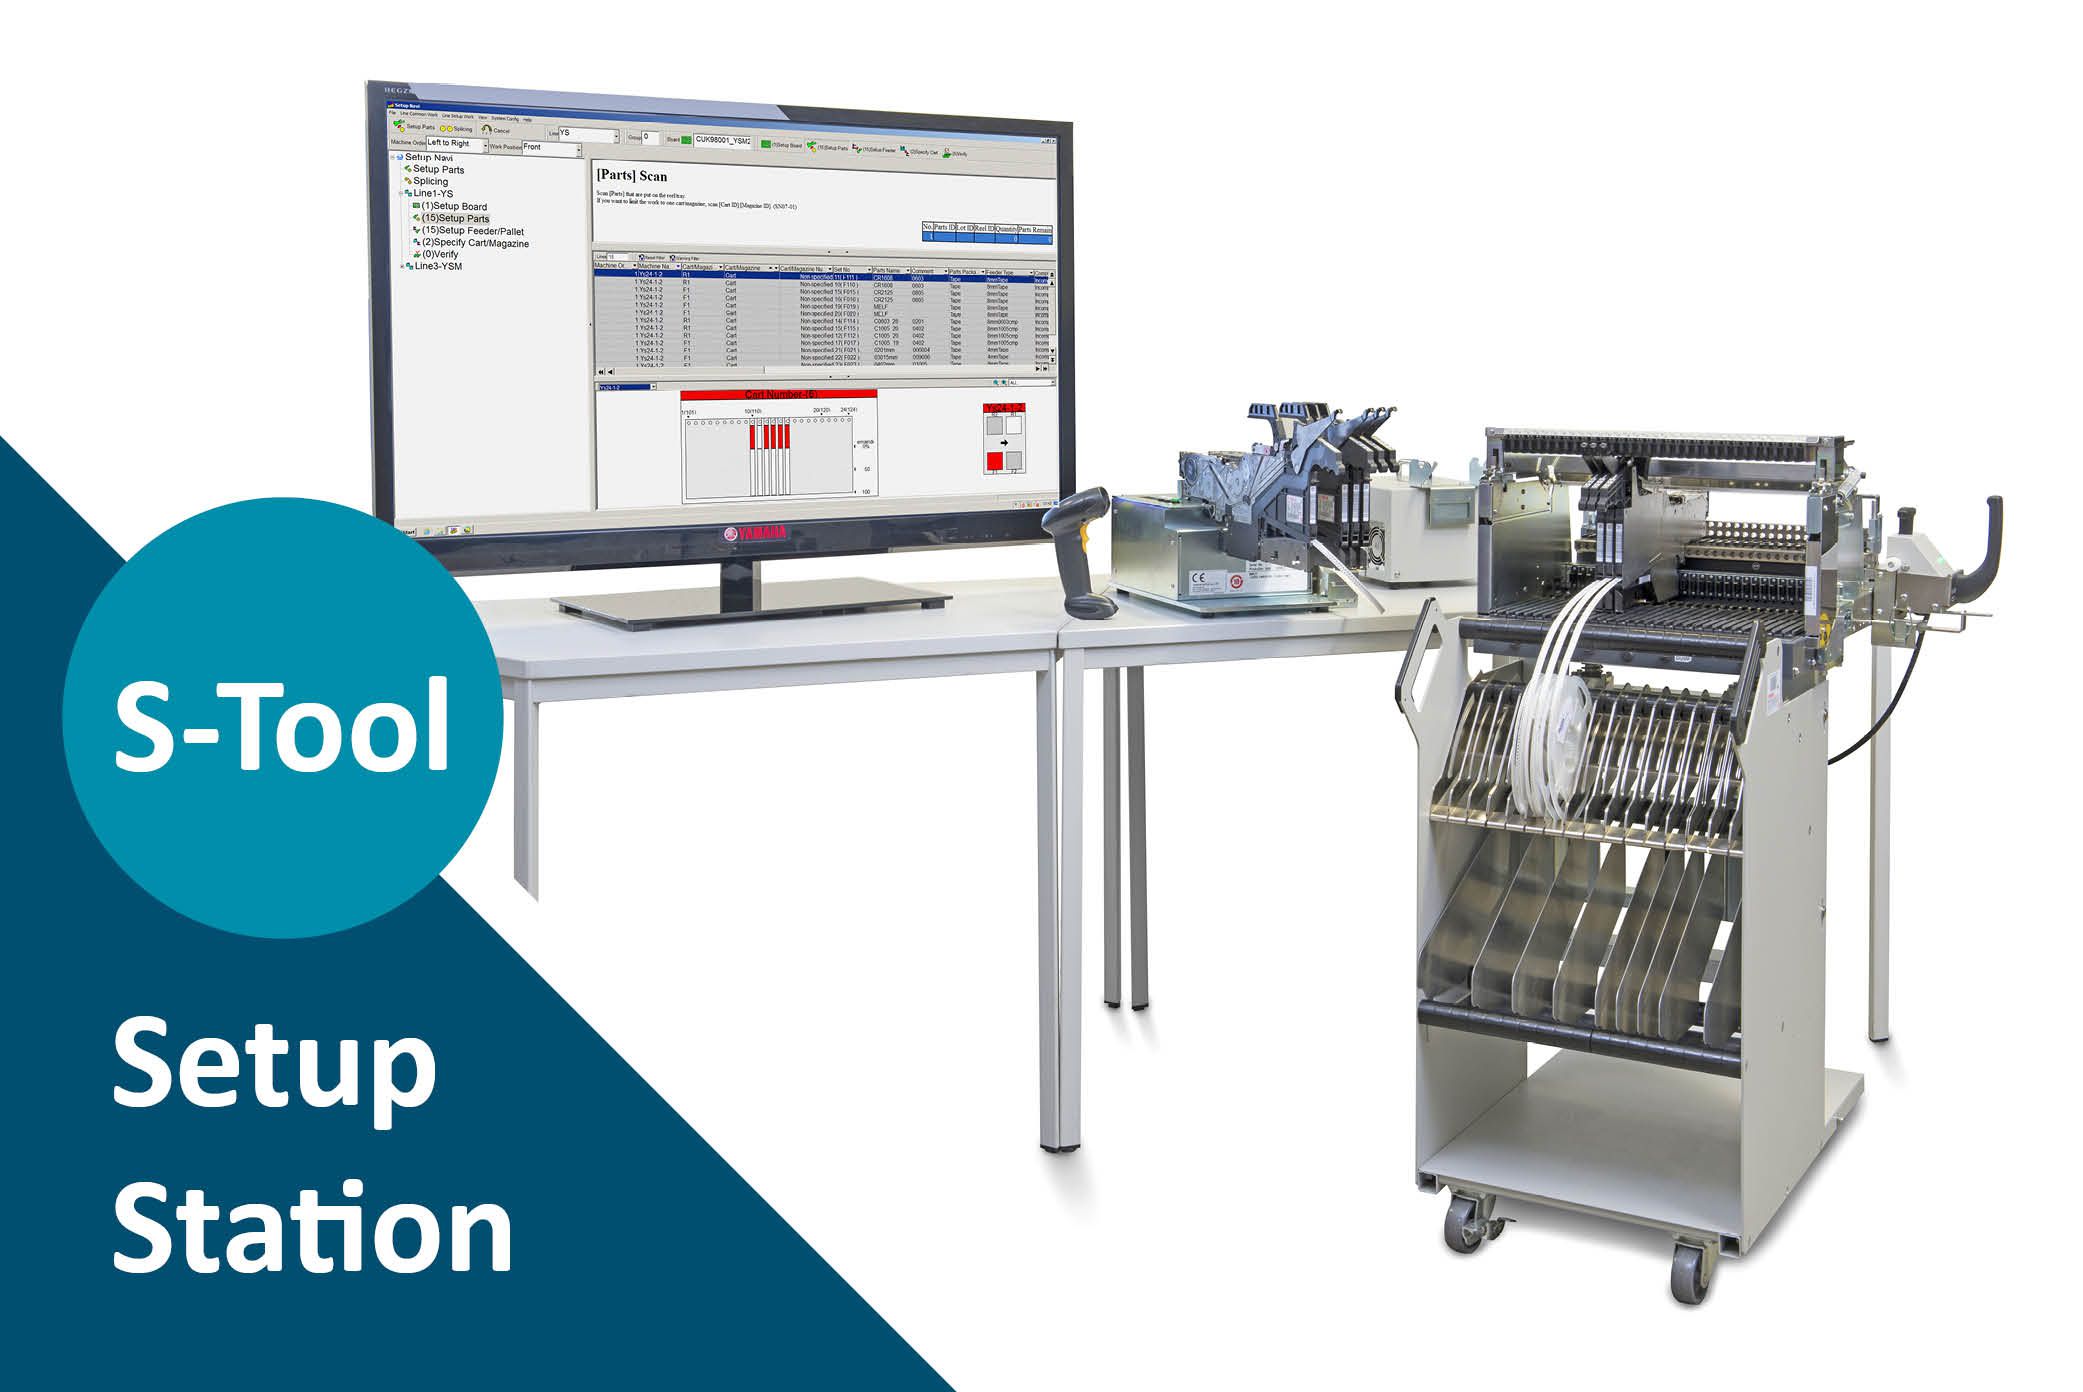 yamaha setup station works in combination with setup software and the feeder cart